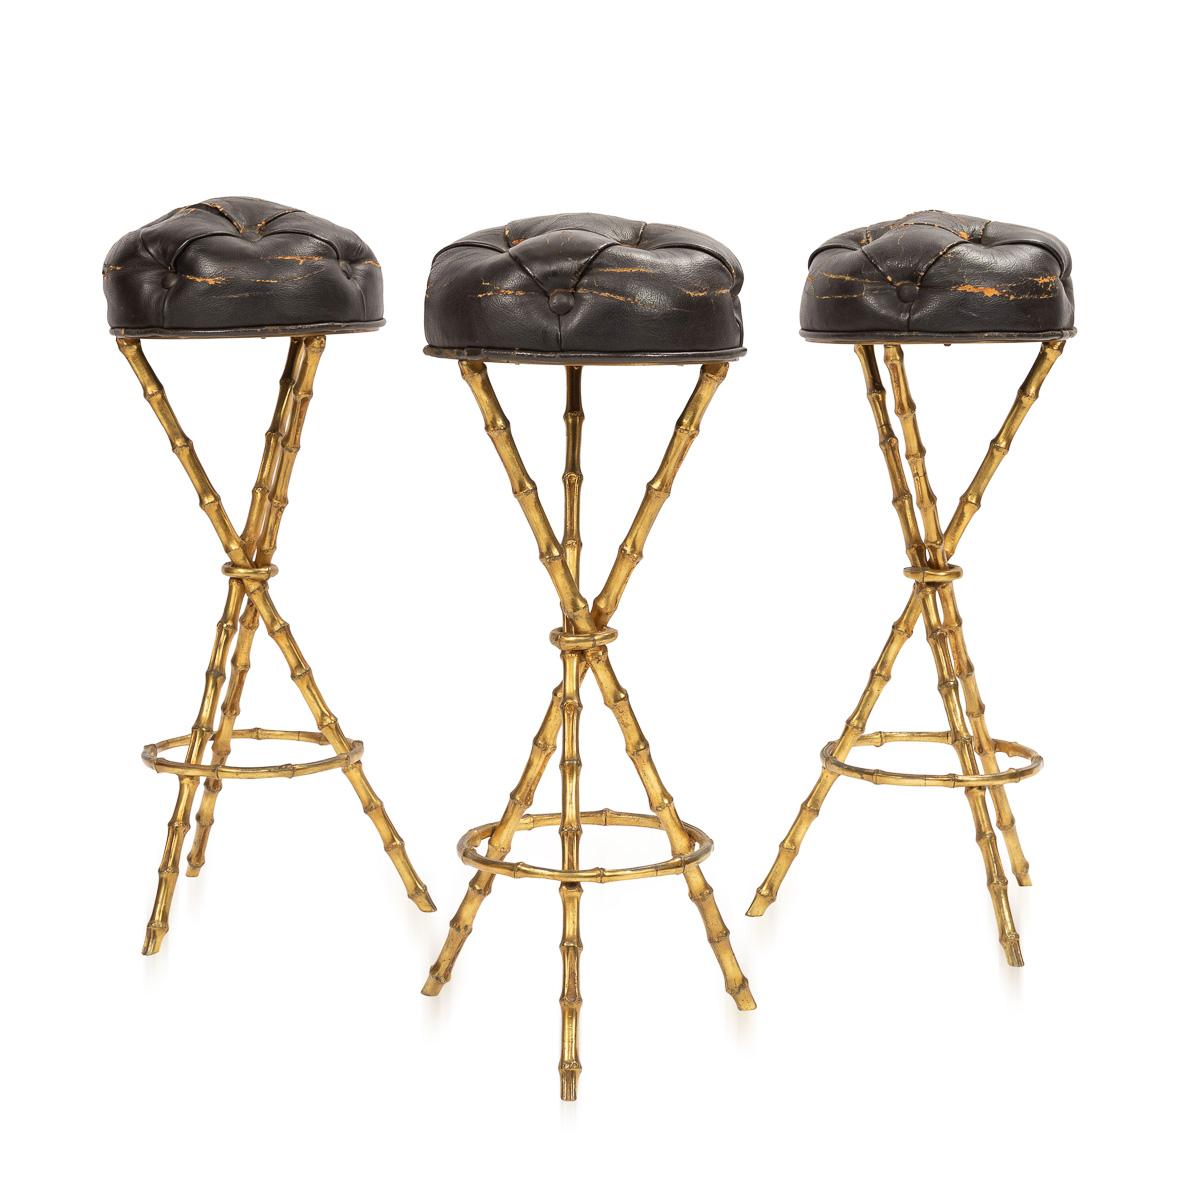 20th Century French Bamboo Cocktail Bar & Bar Stools by Jacques Adnet circa 1950 10